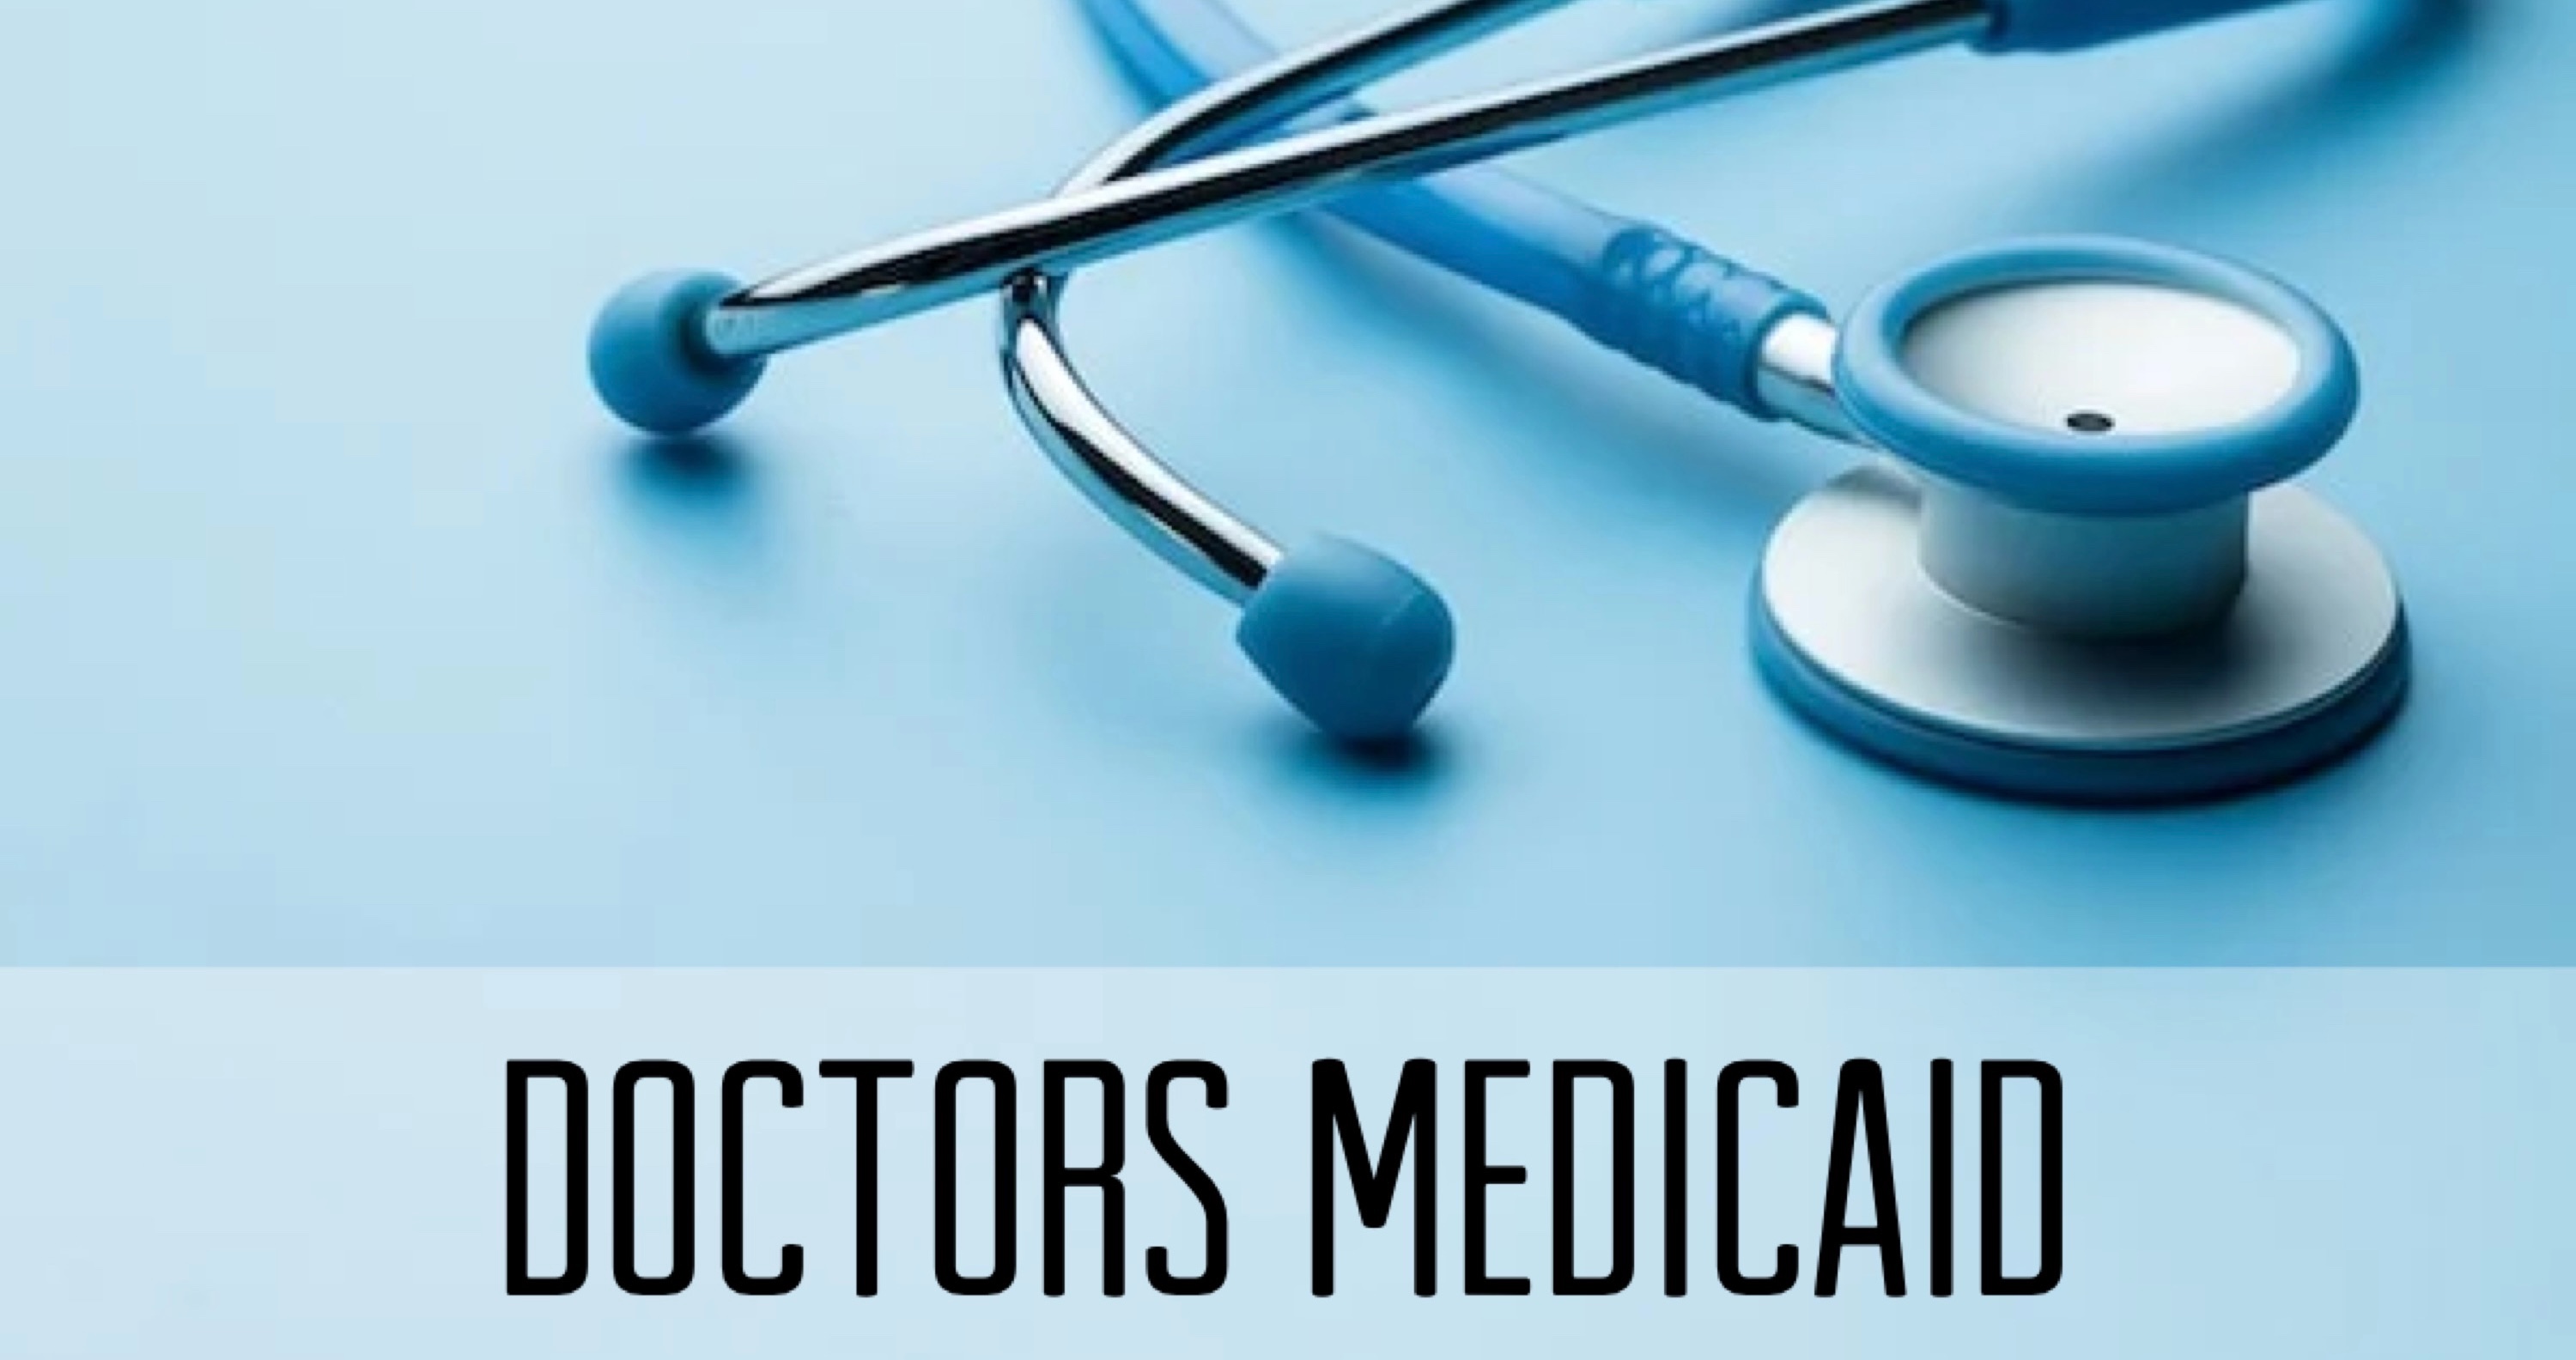 Doctors and Medicaid